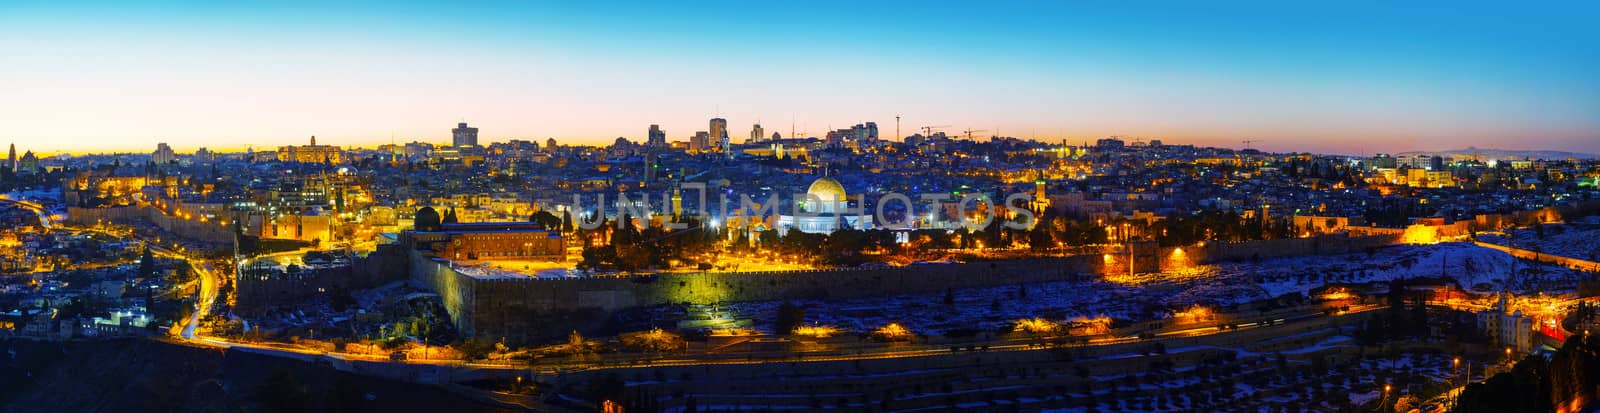 Overview of Old City in Jerusalem, Israel with The Dome of the Rock Mosque